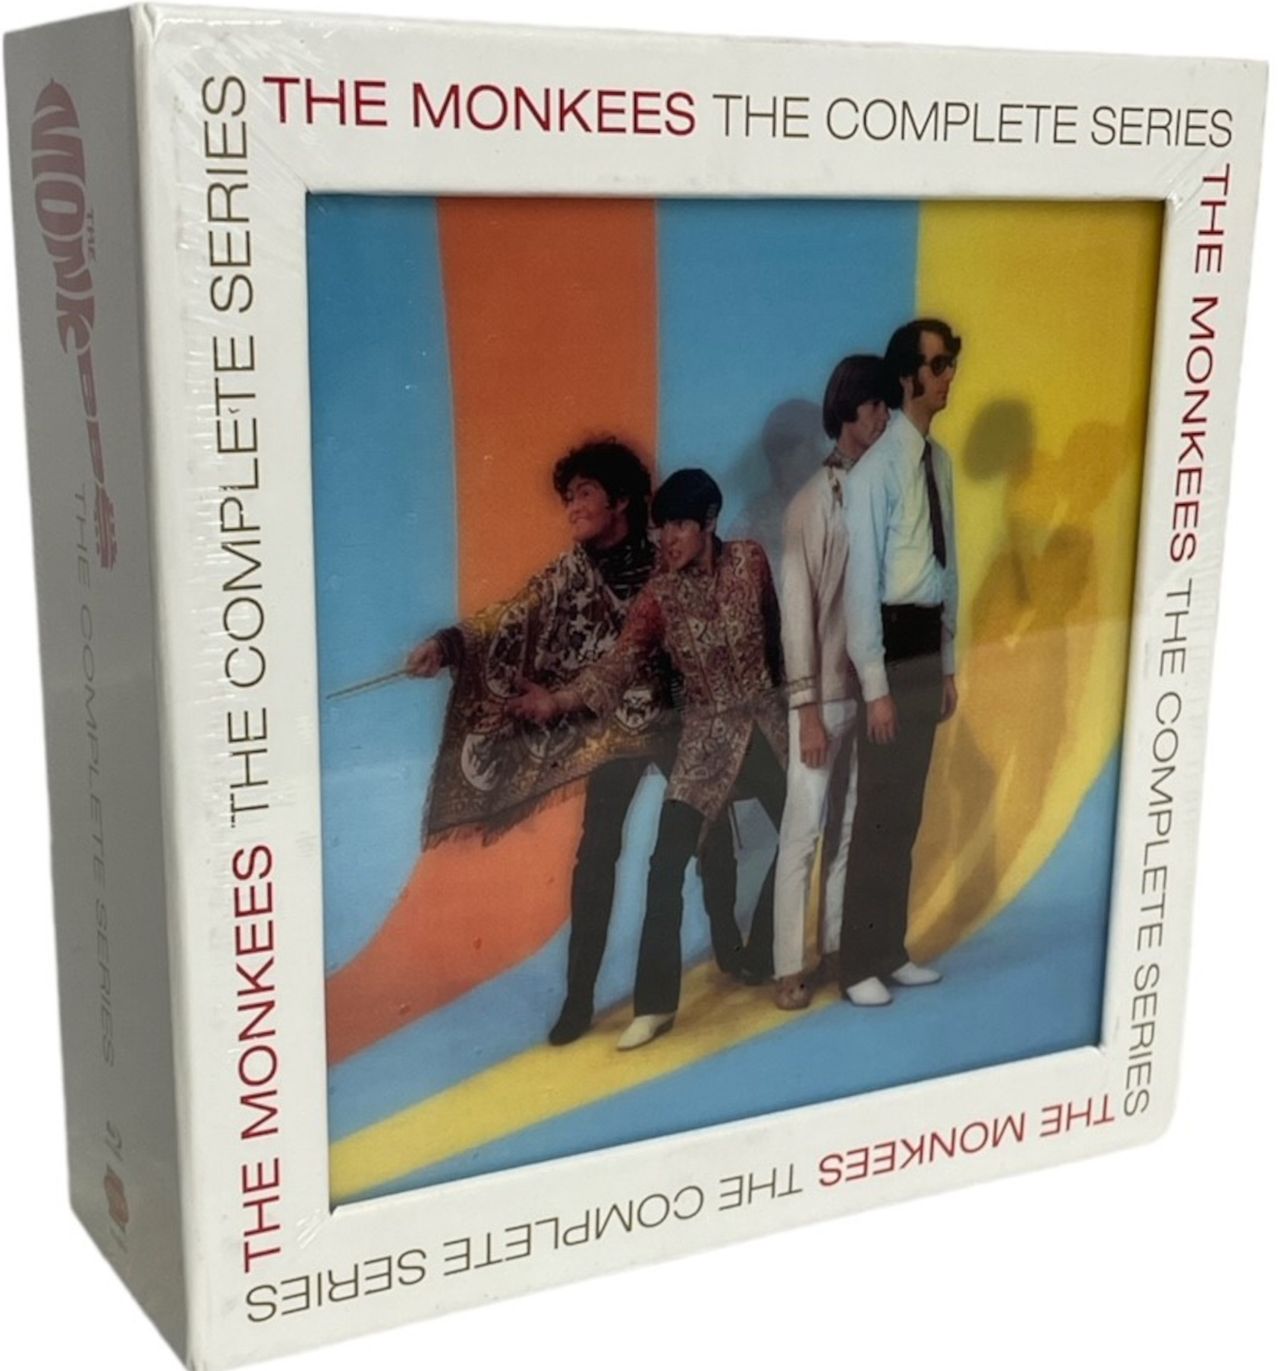 The Monkees The Complete Series - Sealed US Blu Ray